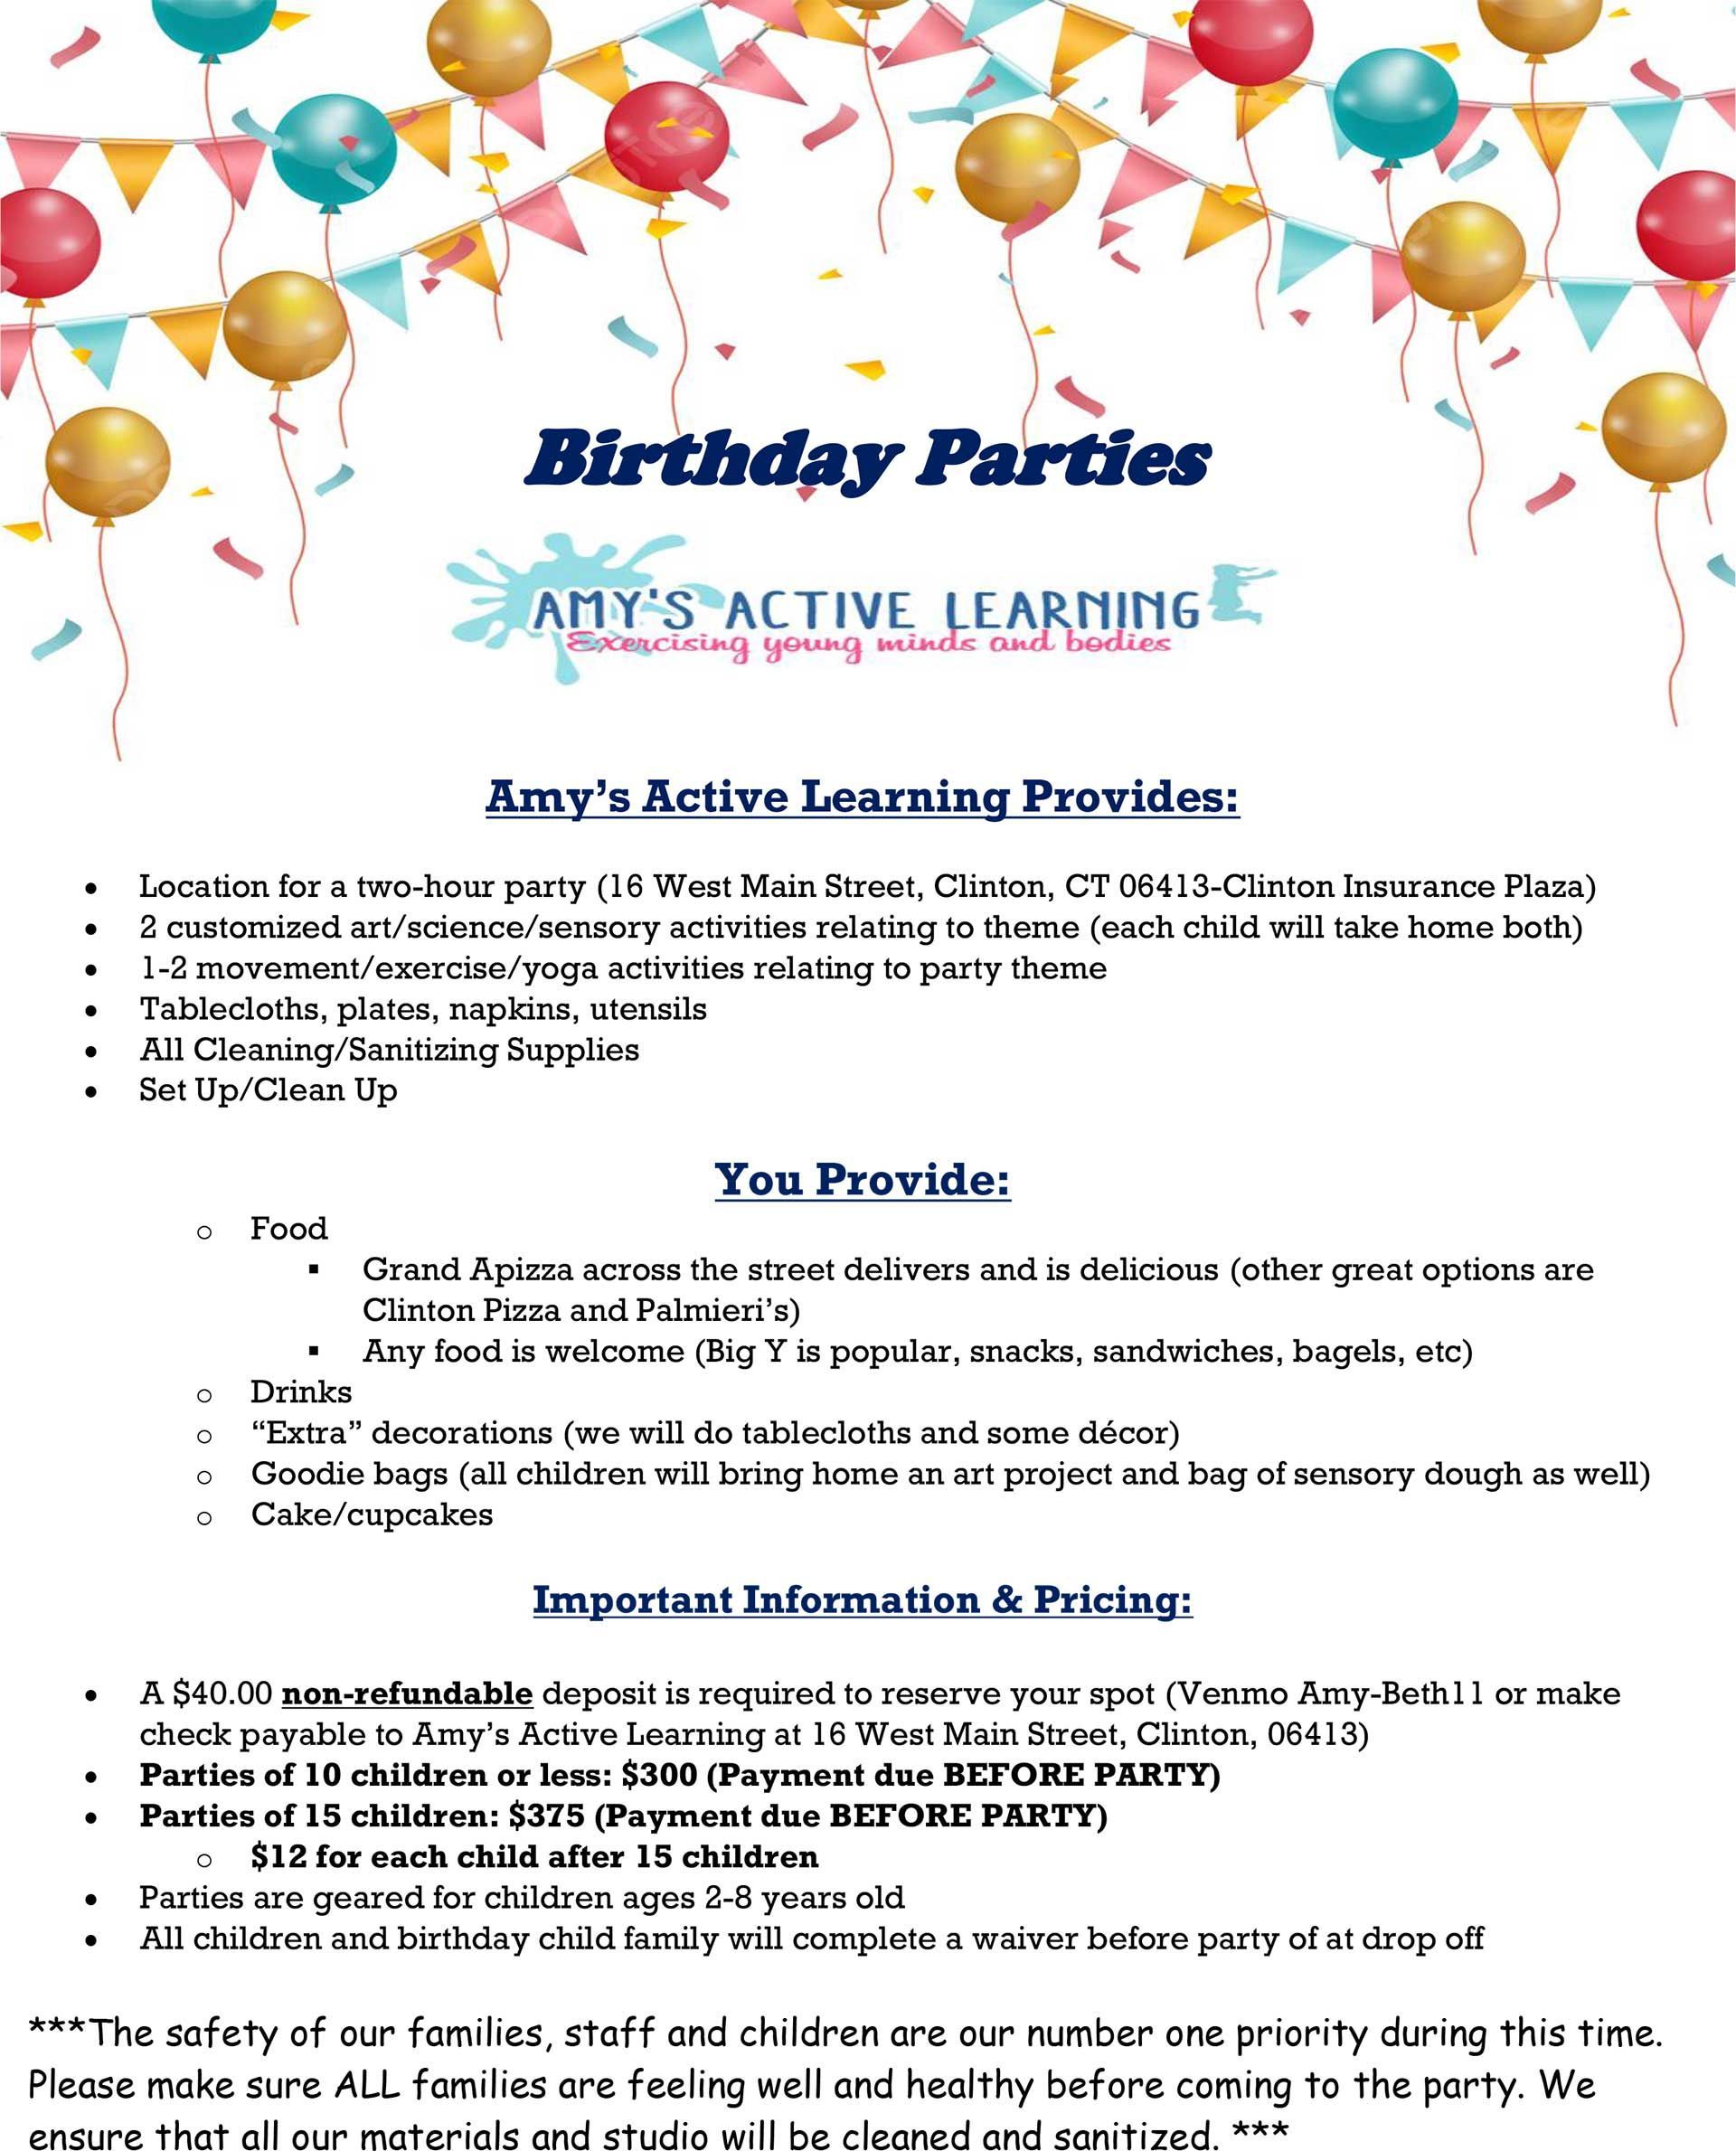 Amy’s Active Learning Birthday Party Flyer